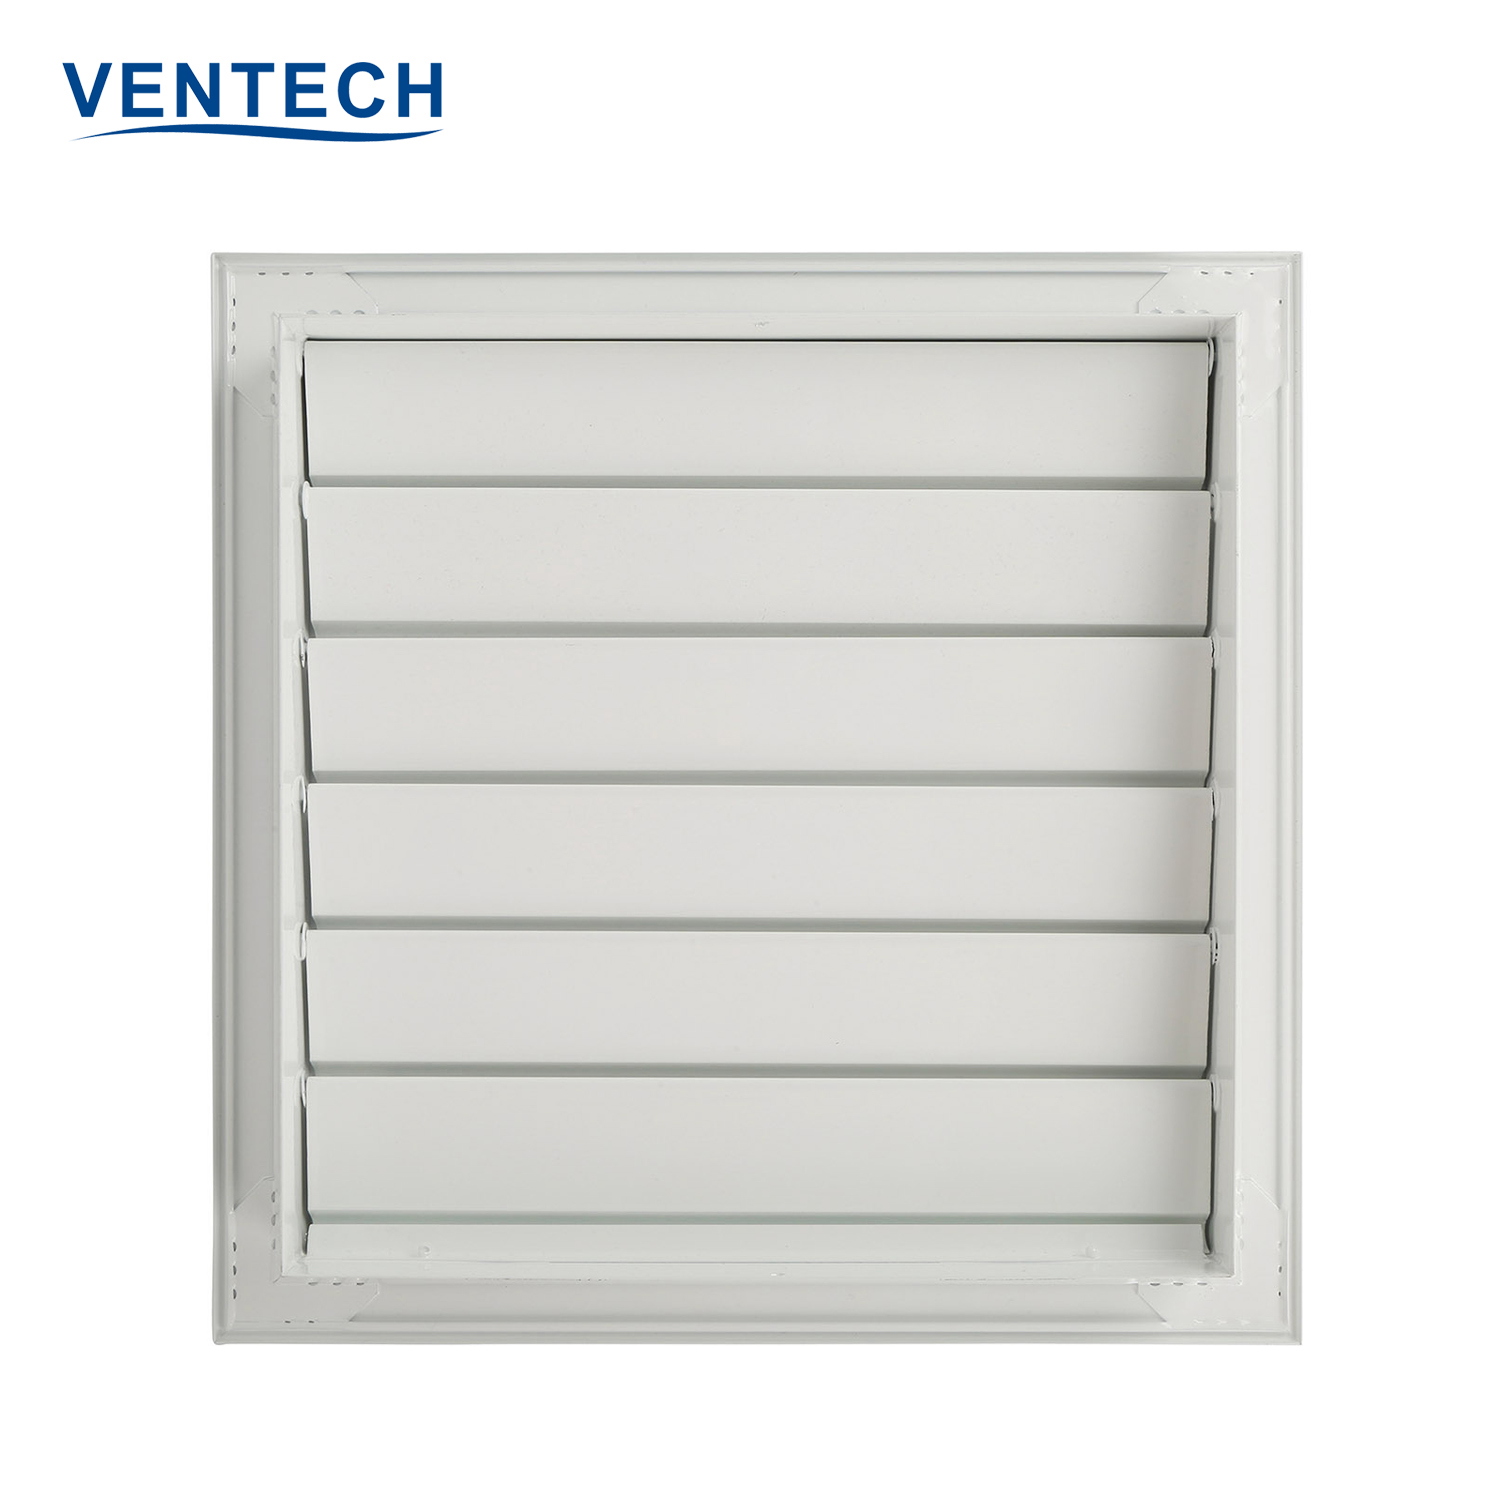 Ventech quality outdoor air louver company for air conditioning-1